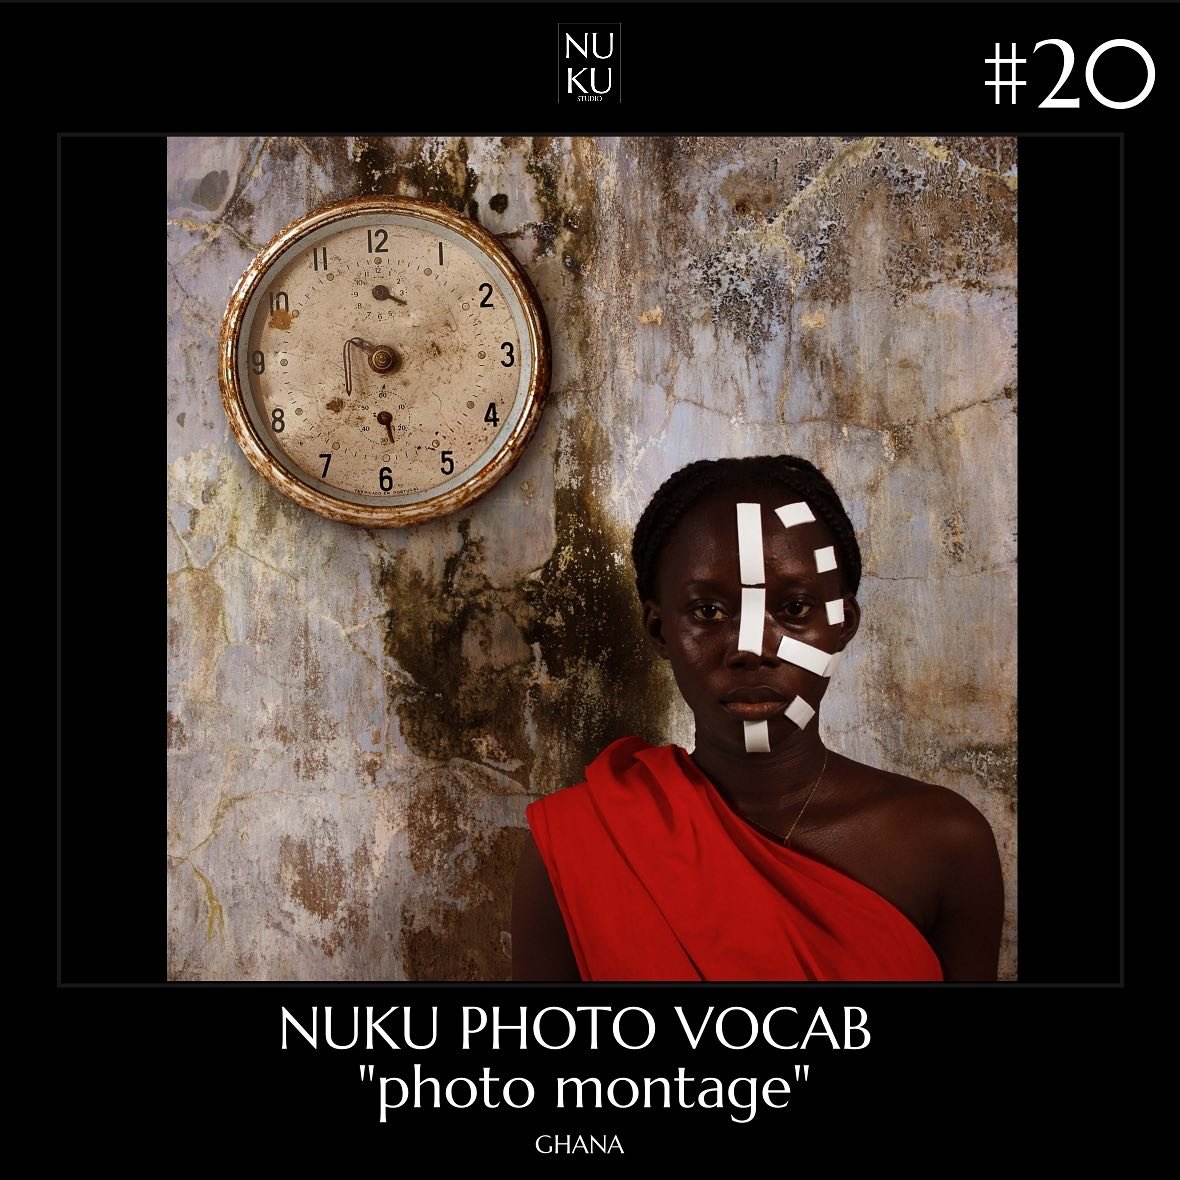 In our previous Nuku Photo Vocabs we focused on photography as the medium creating an immediate photograph. But what happens when it becomes more of a tool in the process of creating a visual?

How does it change the meaning of photography and can we